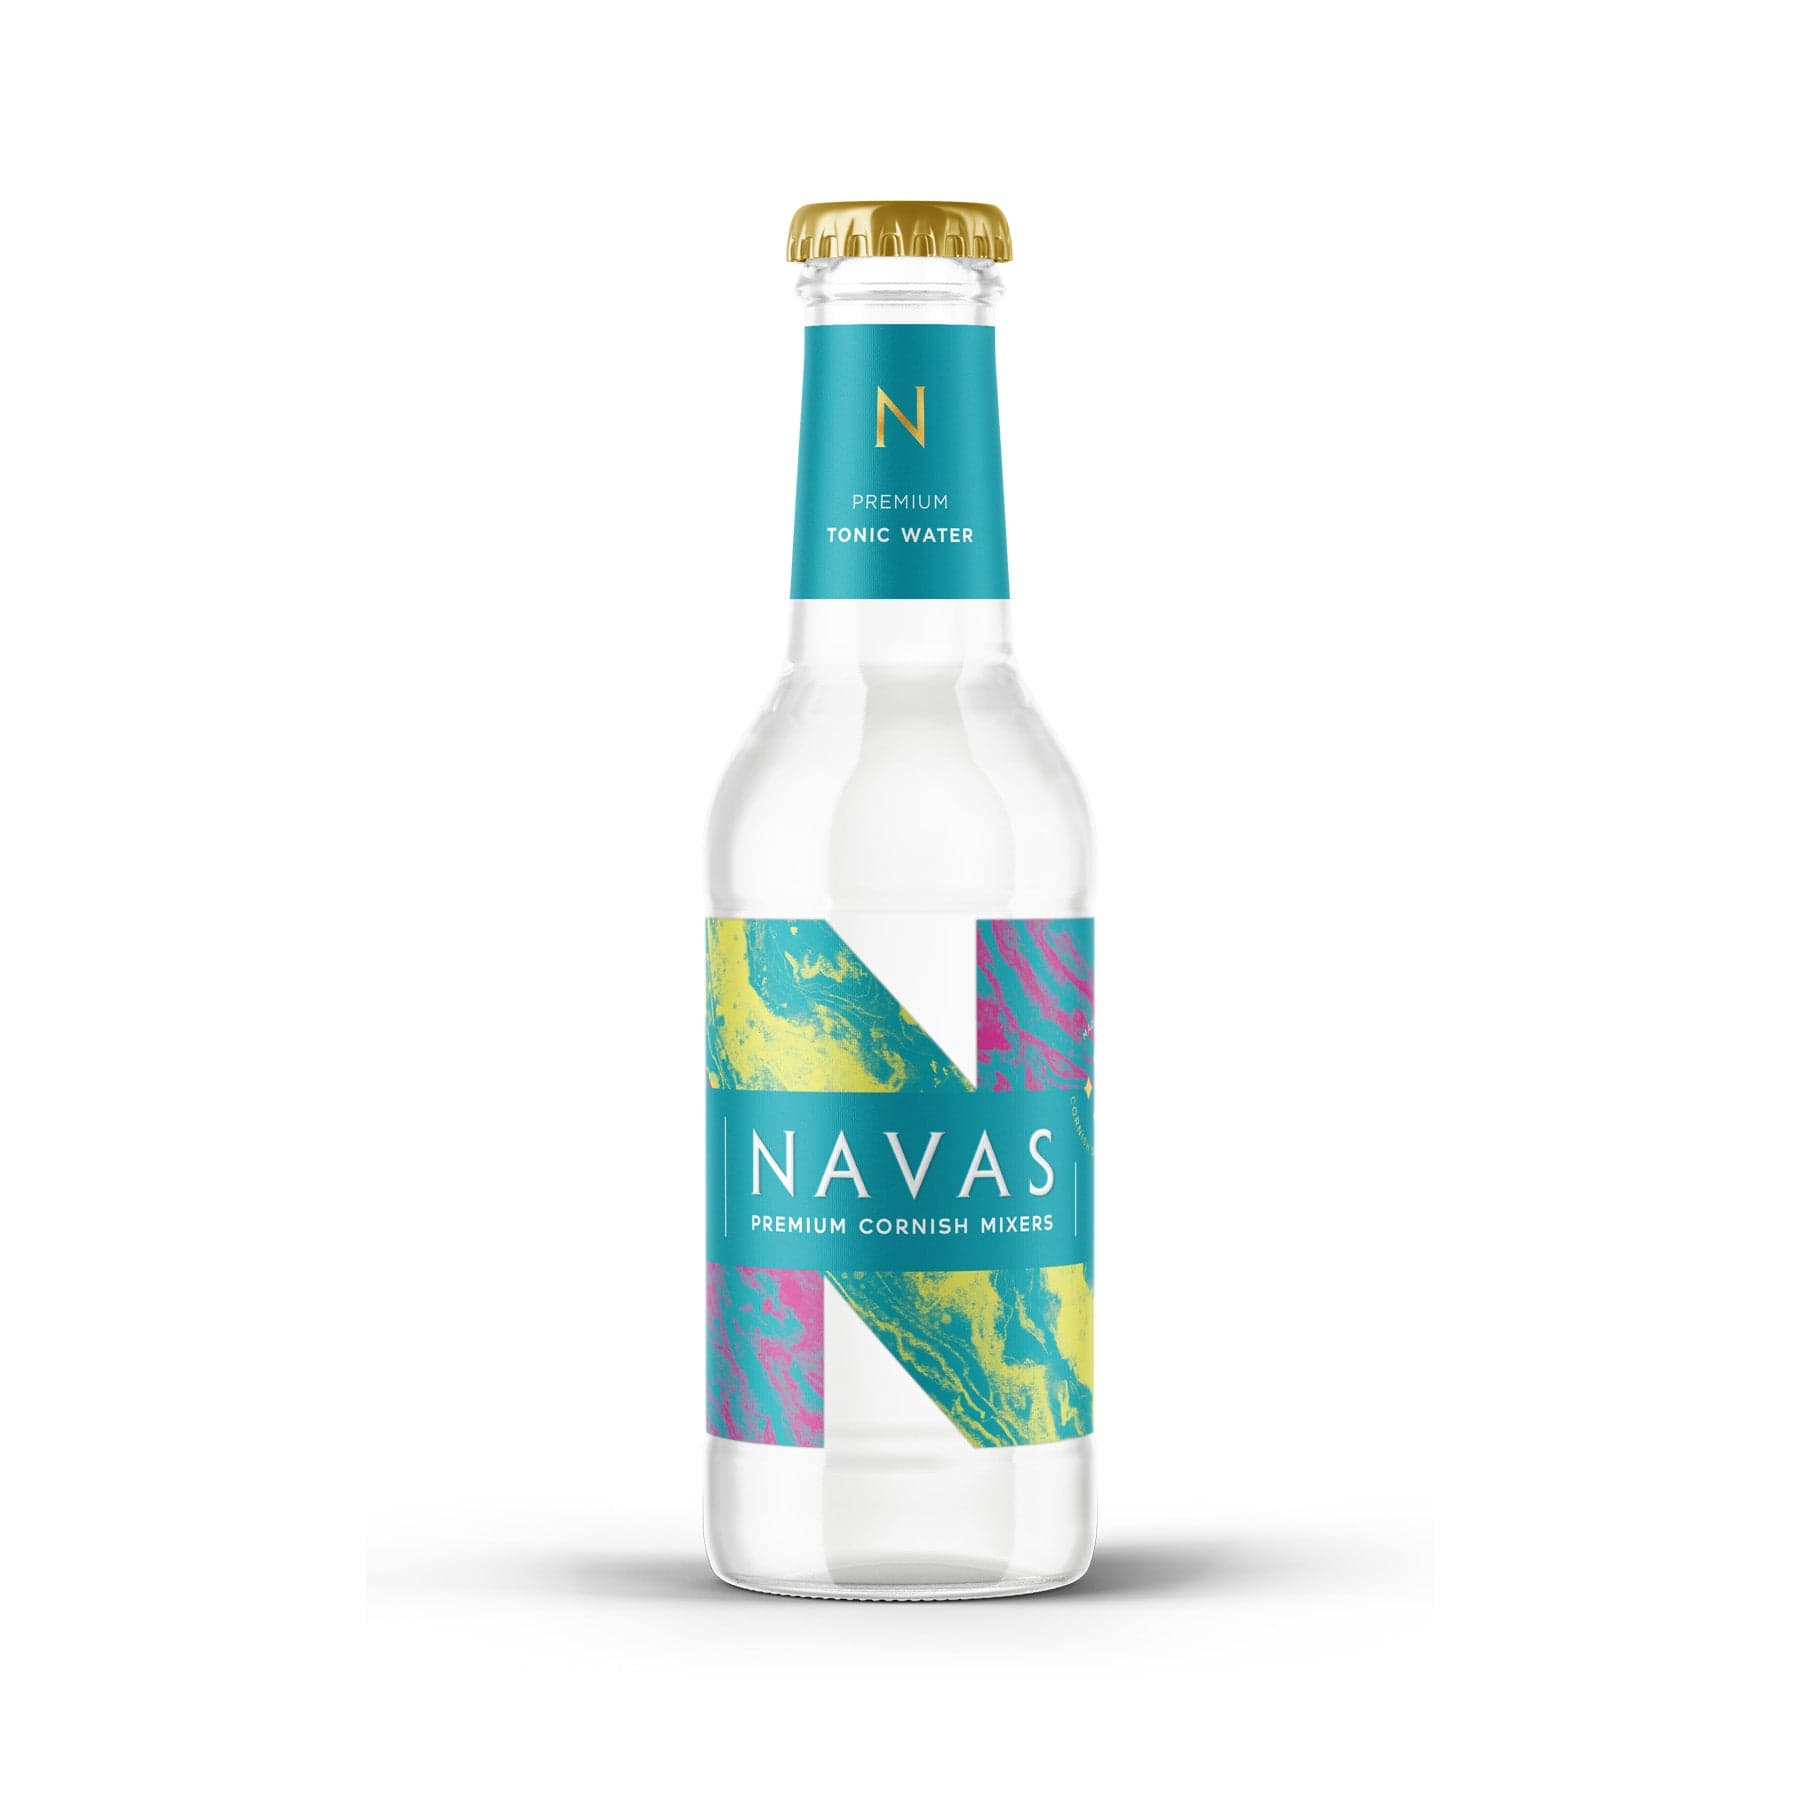 Navas premium tonic water bottle, clear glass bottle of carbonated drink, turquoise and pink abstract label design, gold-colored bottle cap, isolated on white background